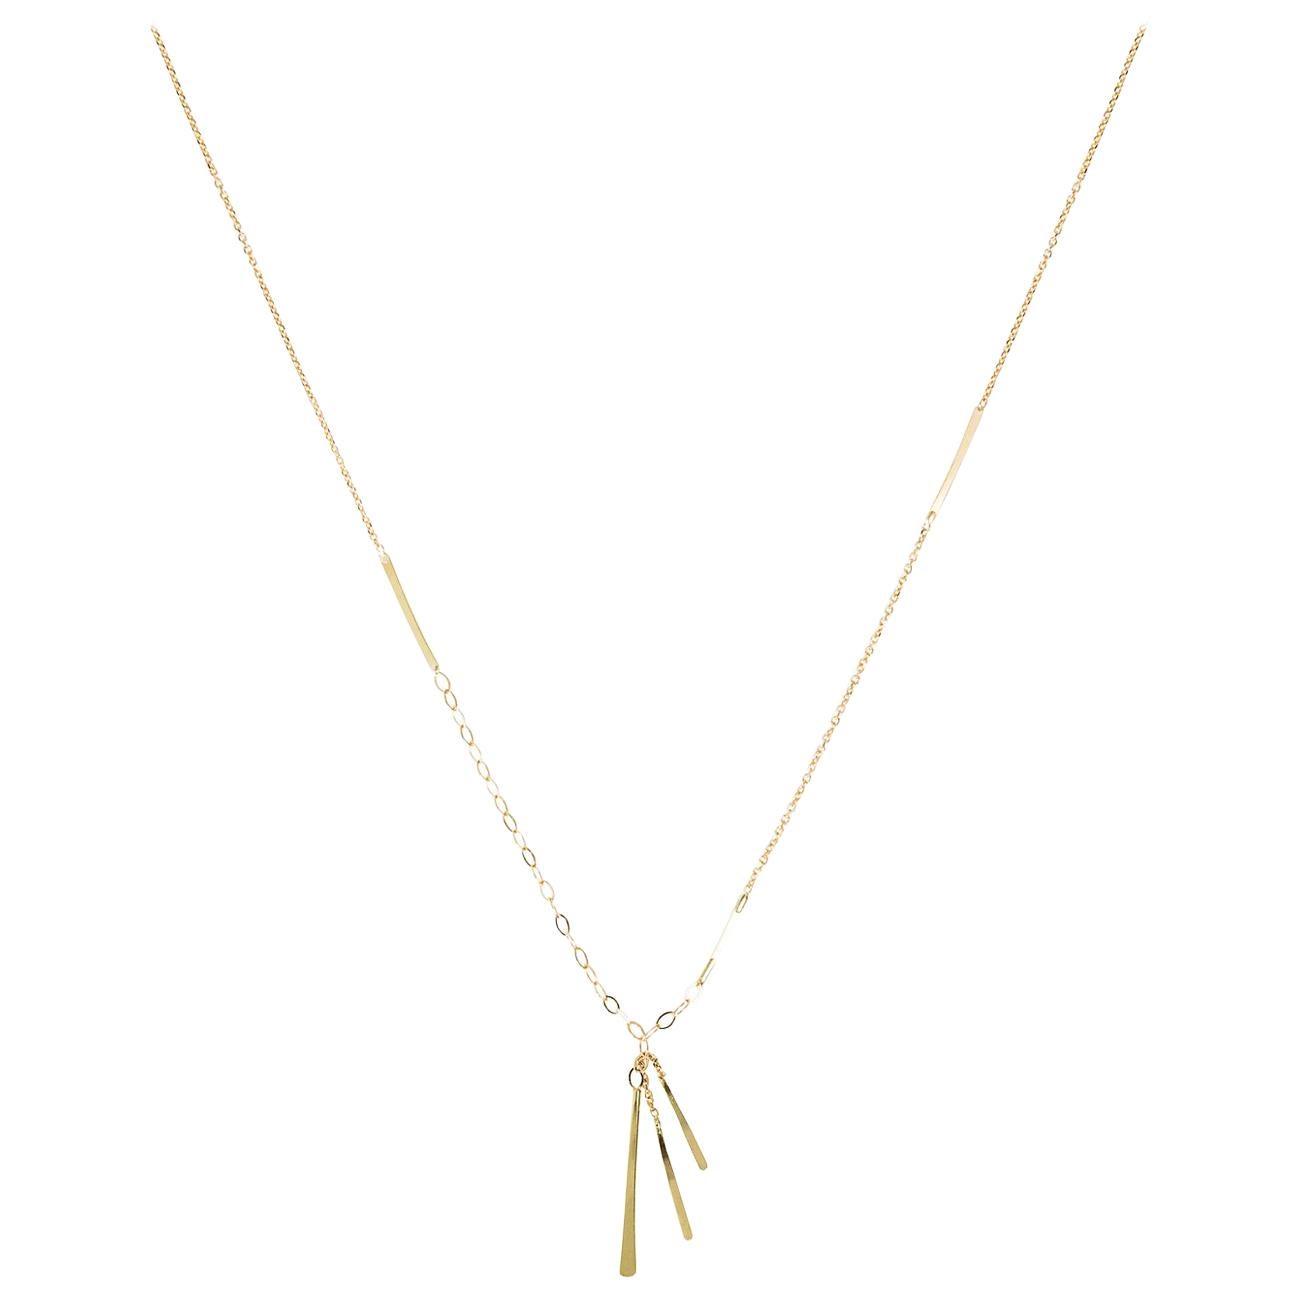 Sweet Pea Sycamore 18k Yellow Gold Necklace With Hanging Bar Details For Sale